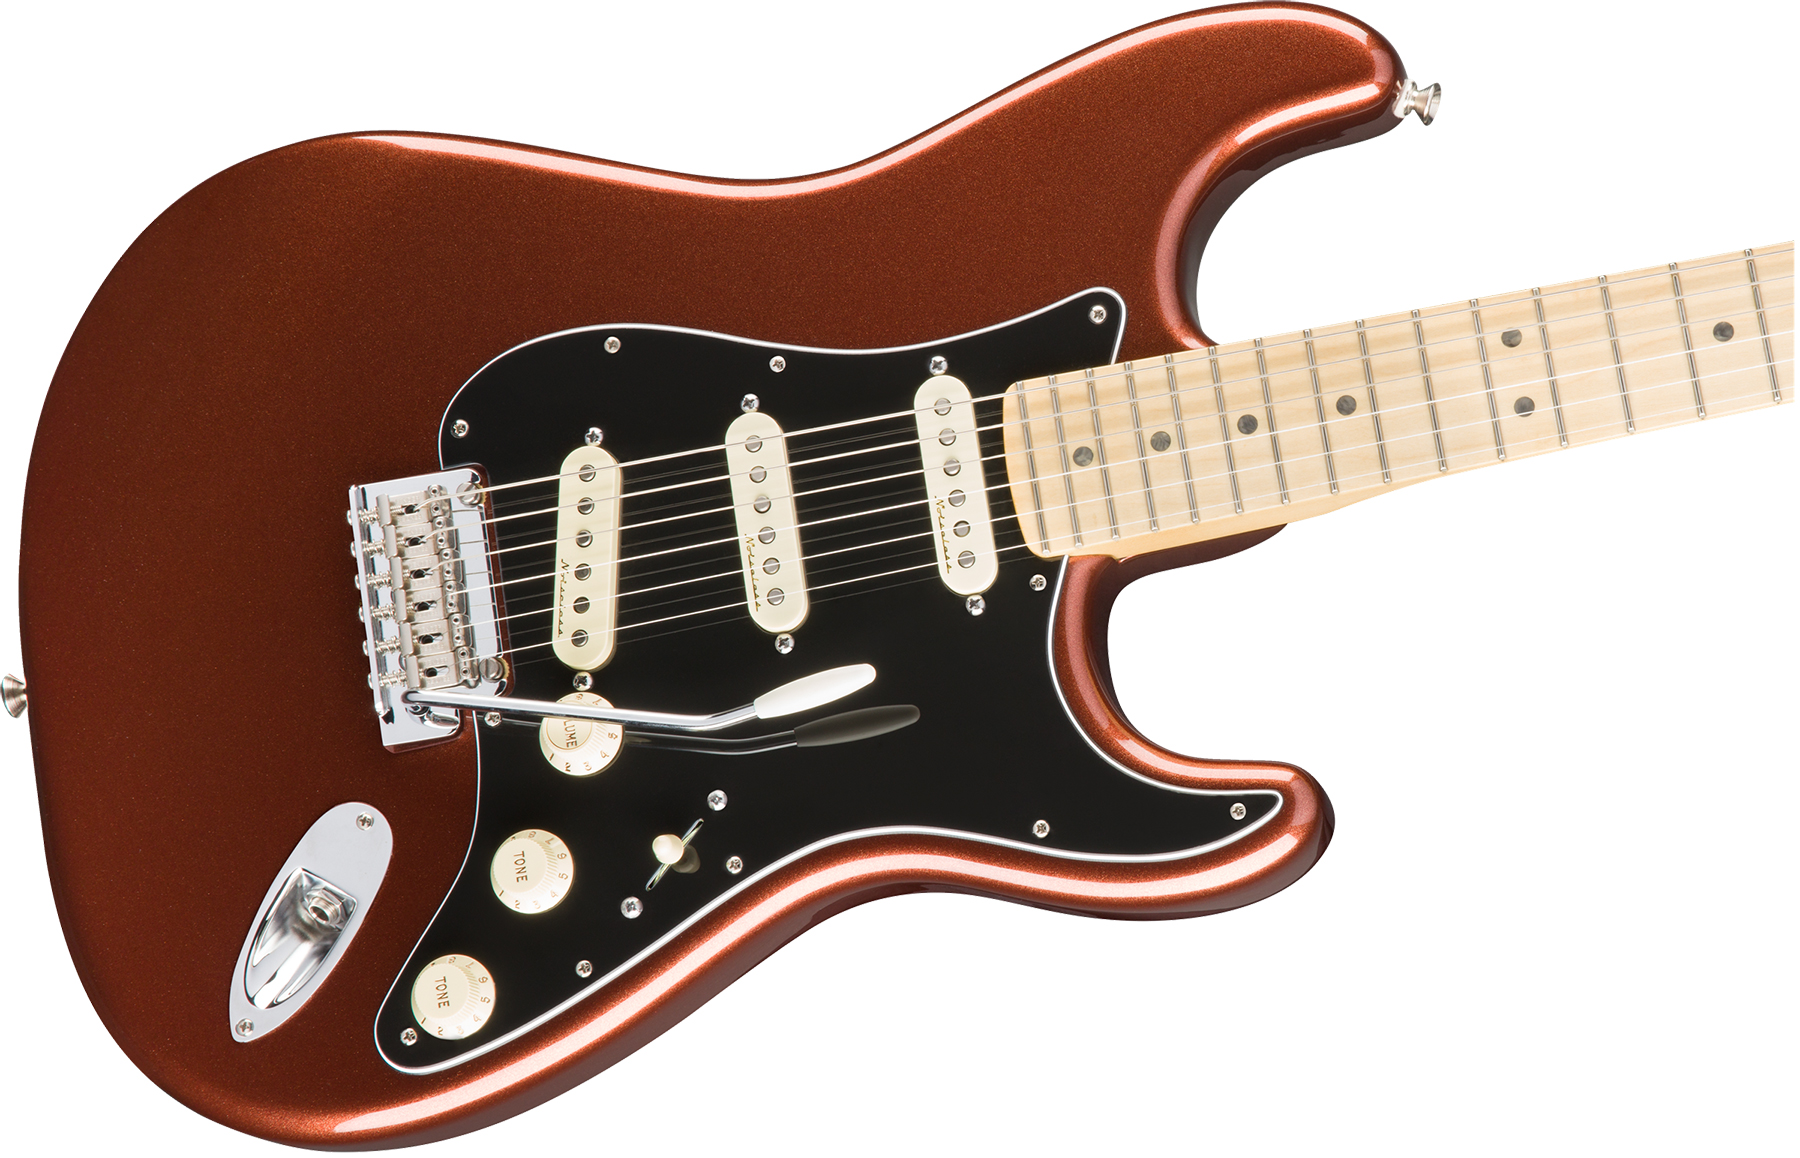 Fender Strat Deluxe Roadhouse Mex Mn - Classic Copper - Str shape electric guitar - Variation 2